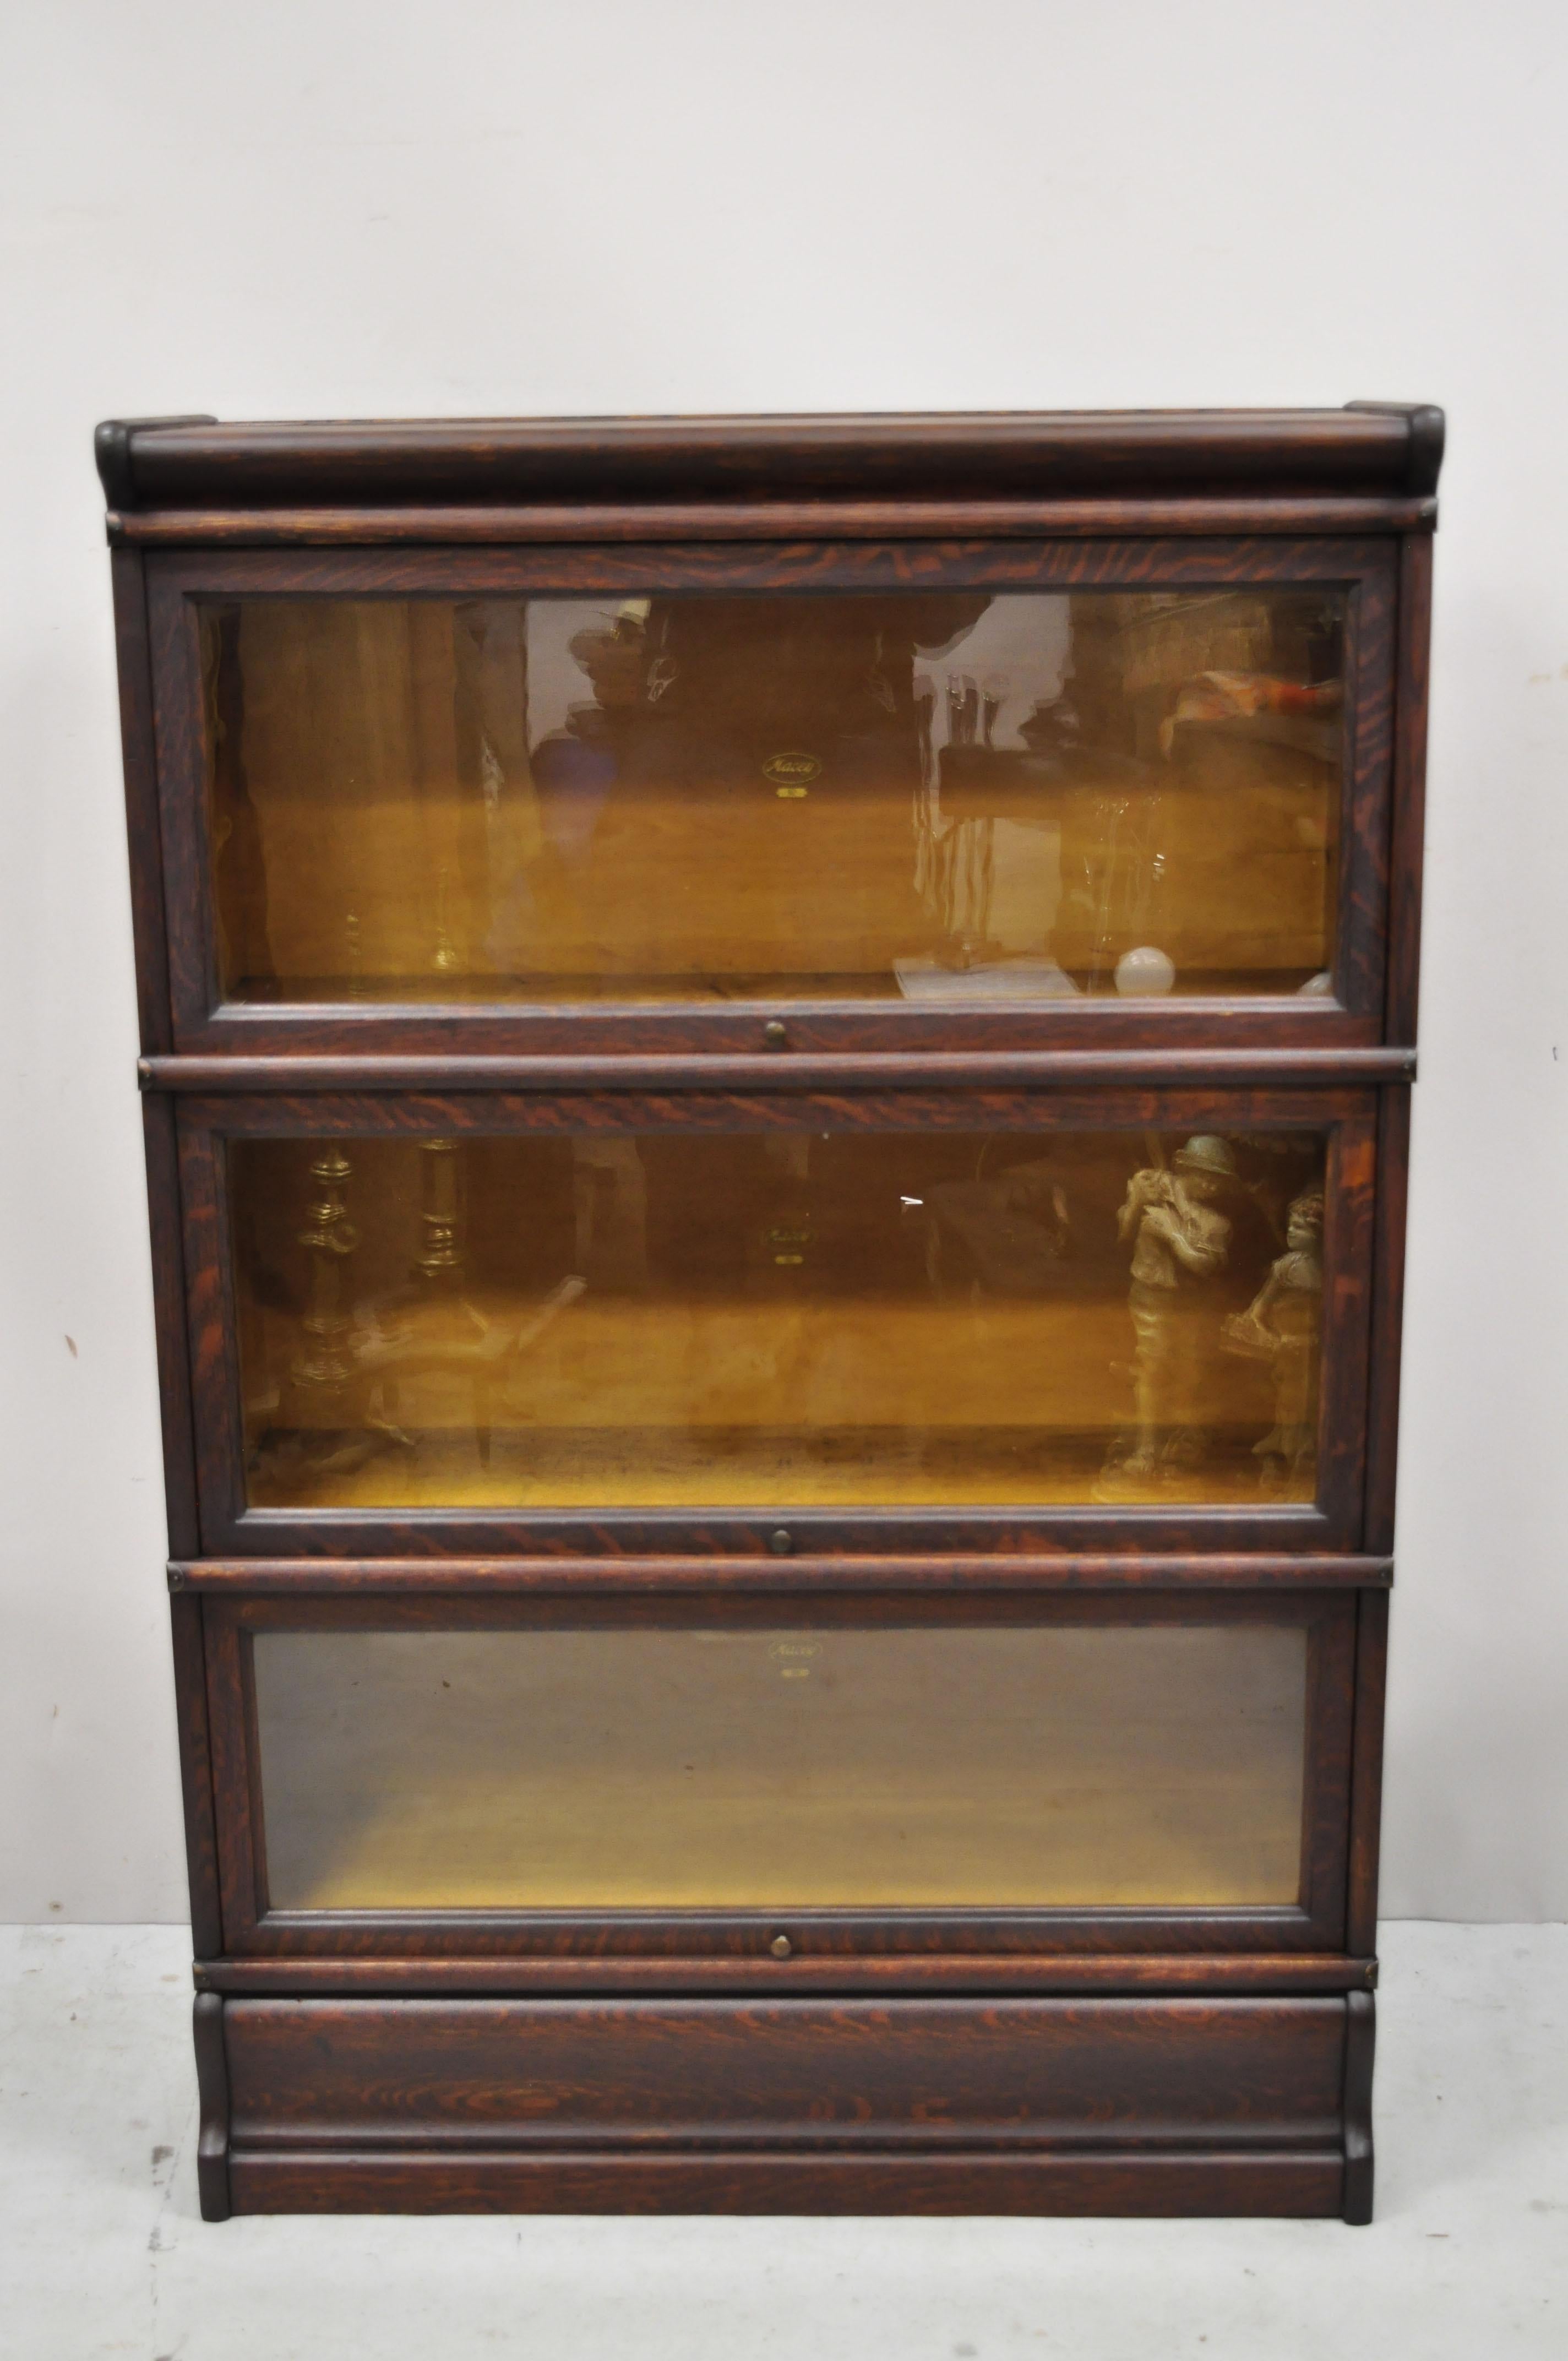 Antique Macey golden oak 3 section stacking barrister lawyers bookcase. Item features 3 oak sliding glass doors, 3 sections, beautiful wood grain, original label, quality American craftsmanship, great style and form. Circa Early 1900s. Measurements: